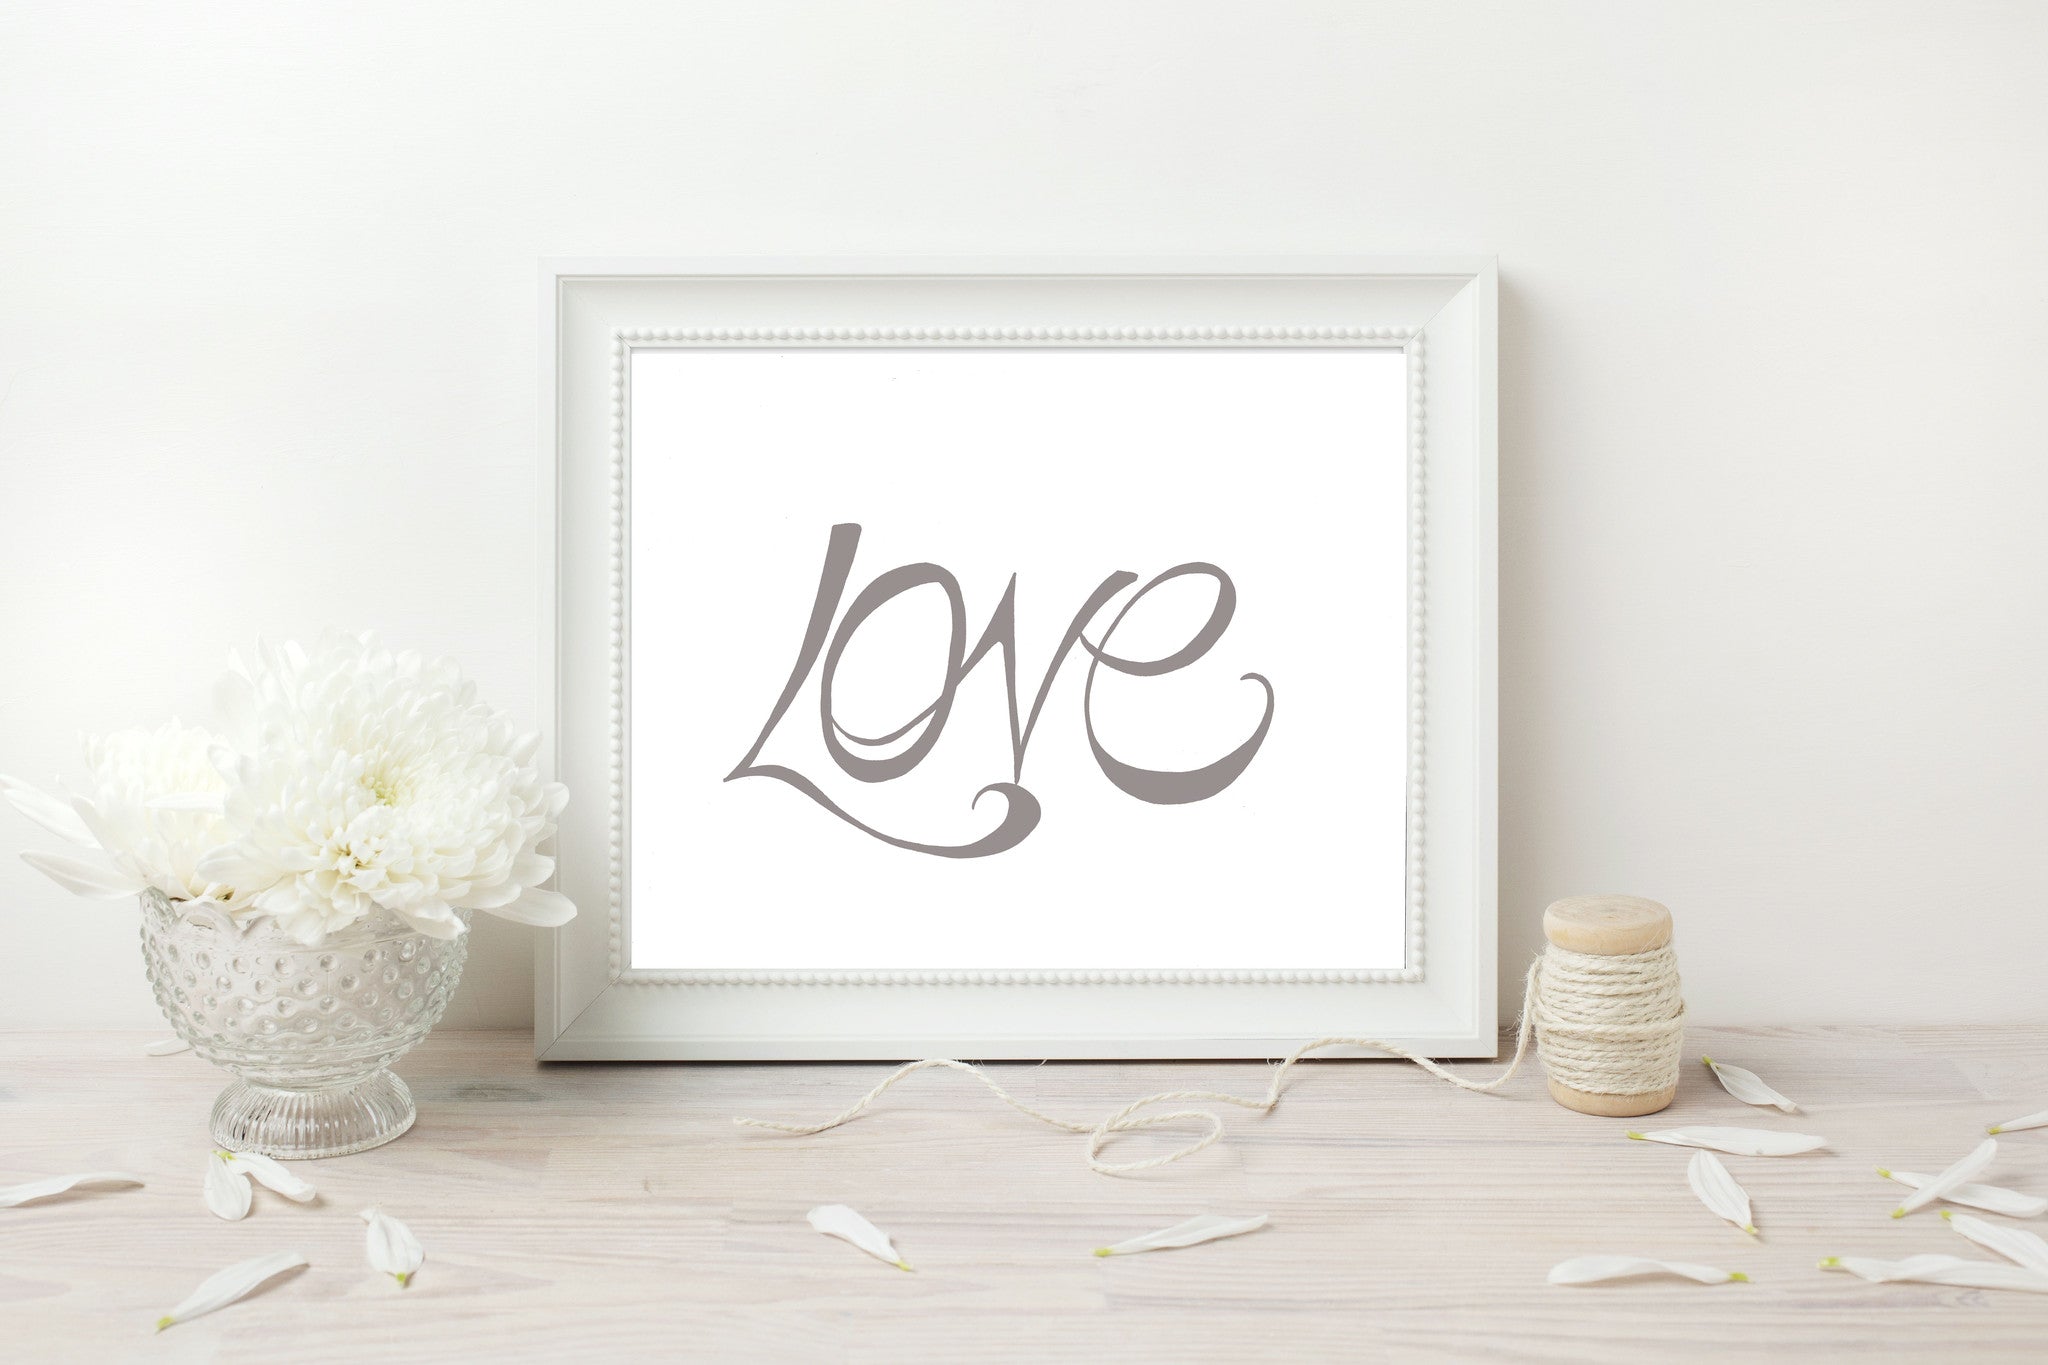 Hand Illustrated Love Print - Grey on White